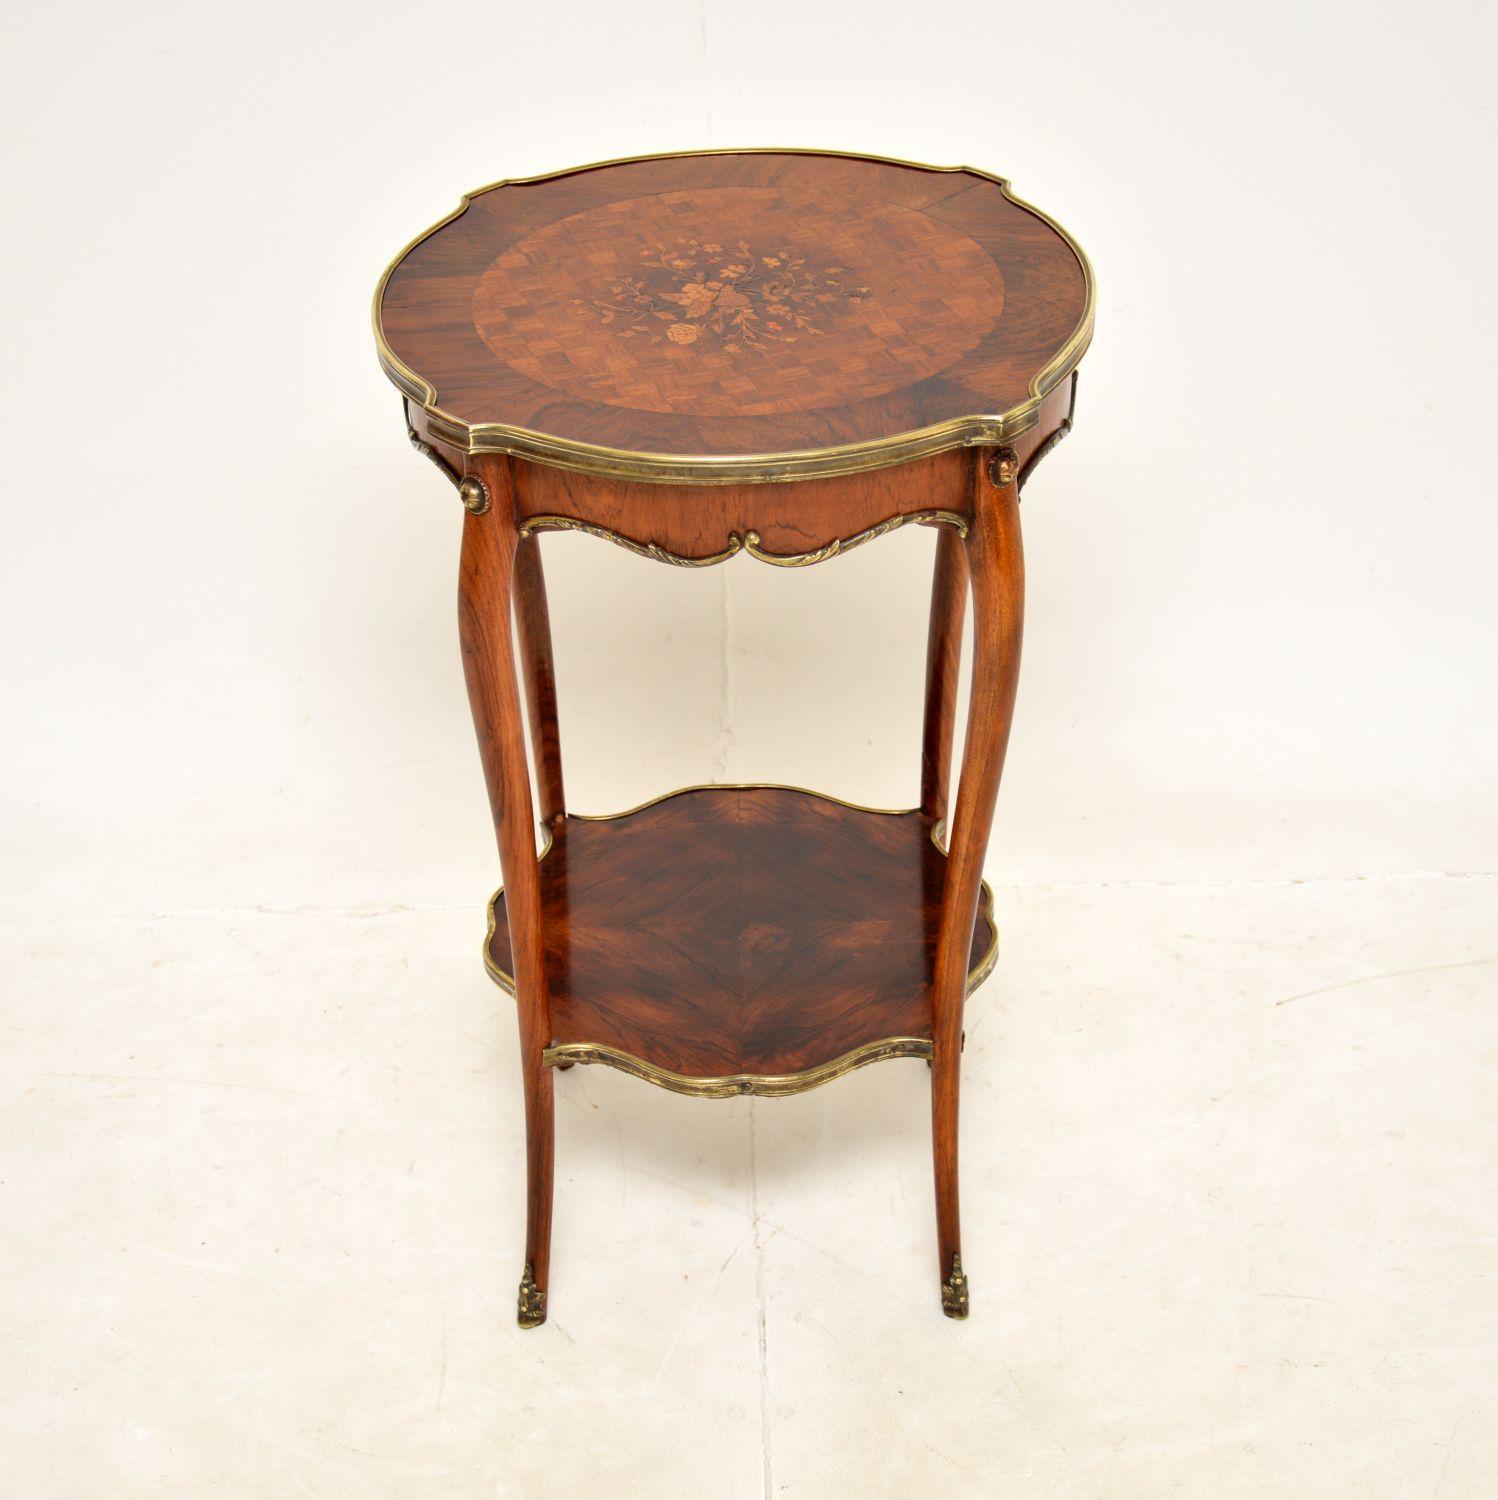 A beautiful antique French occasional side table, dating from around the 1880-1890 period.

This is of extremely fine quality, with fantastic gilt bronze mounts. The top has a cross banded edge, inlaid with gorgeous floral patterns. There is a